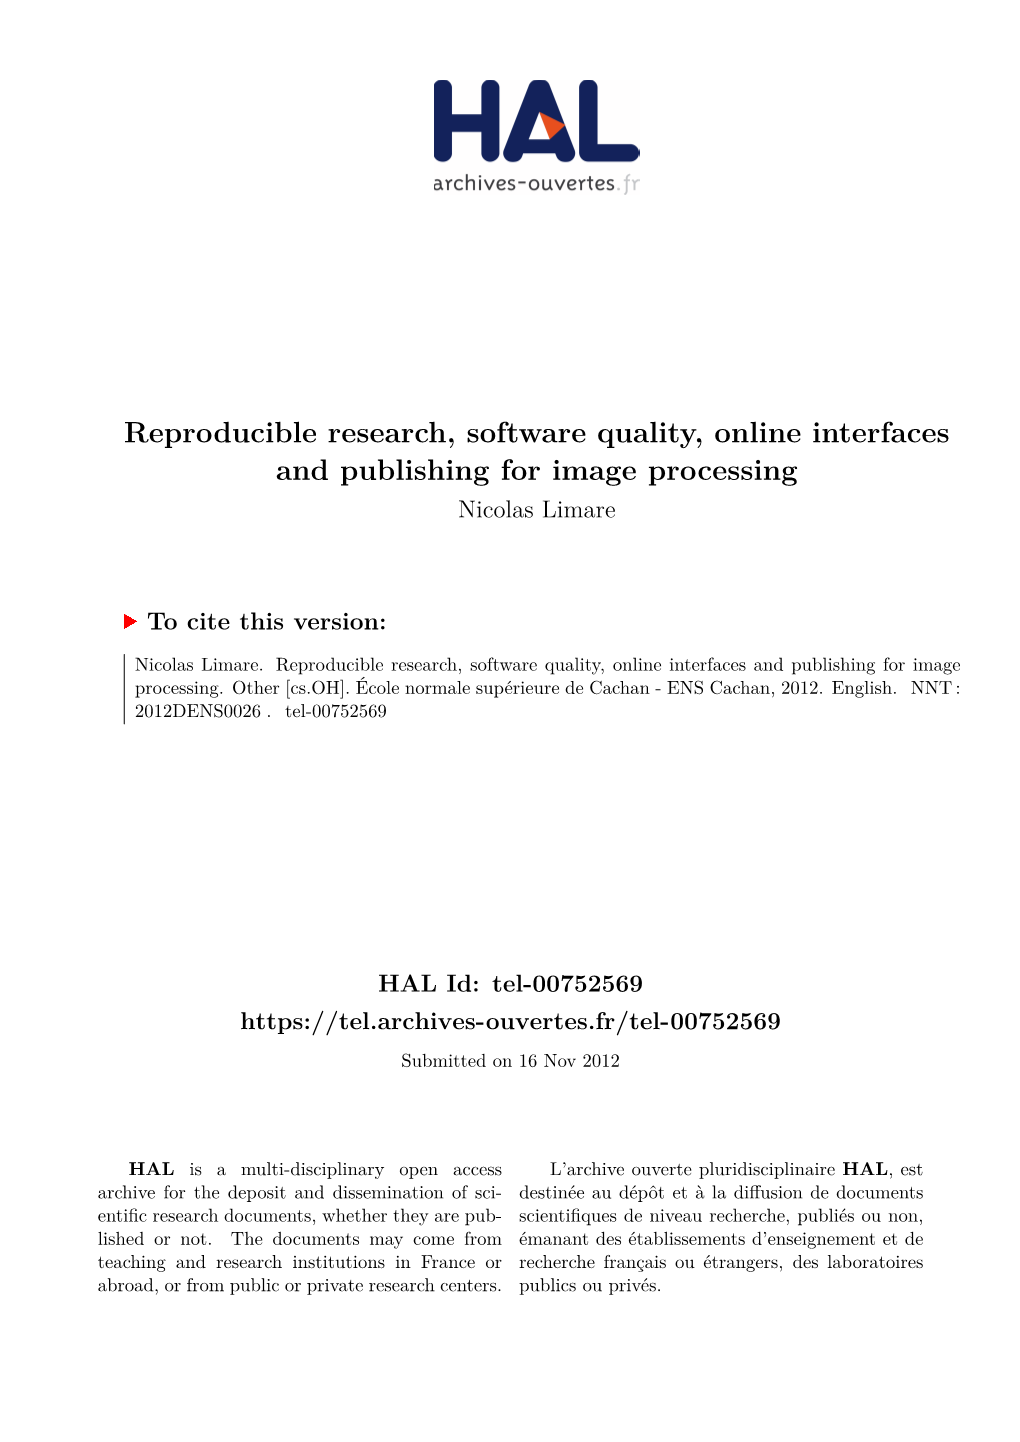 Reproducible Research, Software Quality, Online Interfaces and Publishing for Image Processing Nicolas Limare